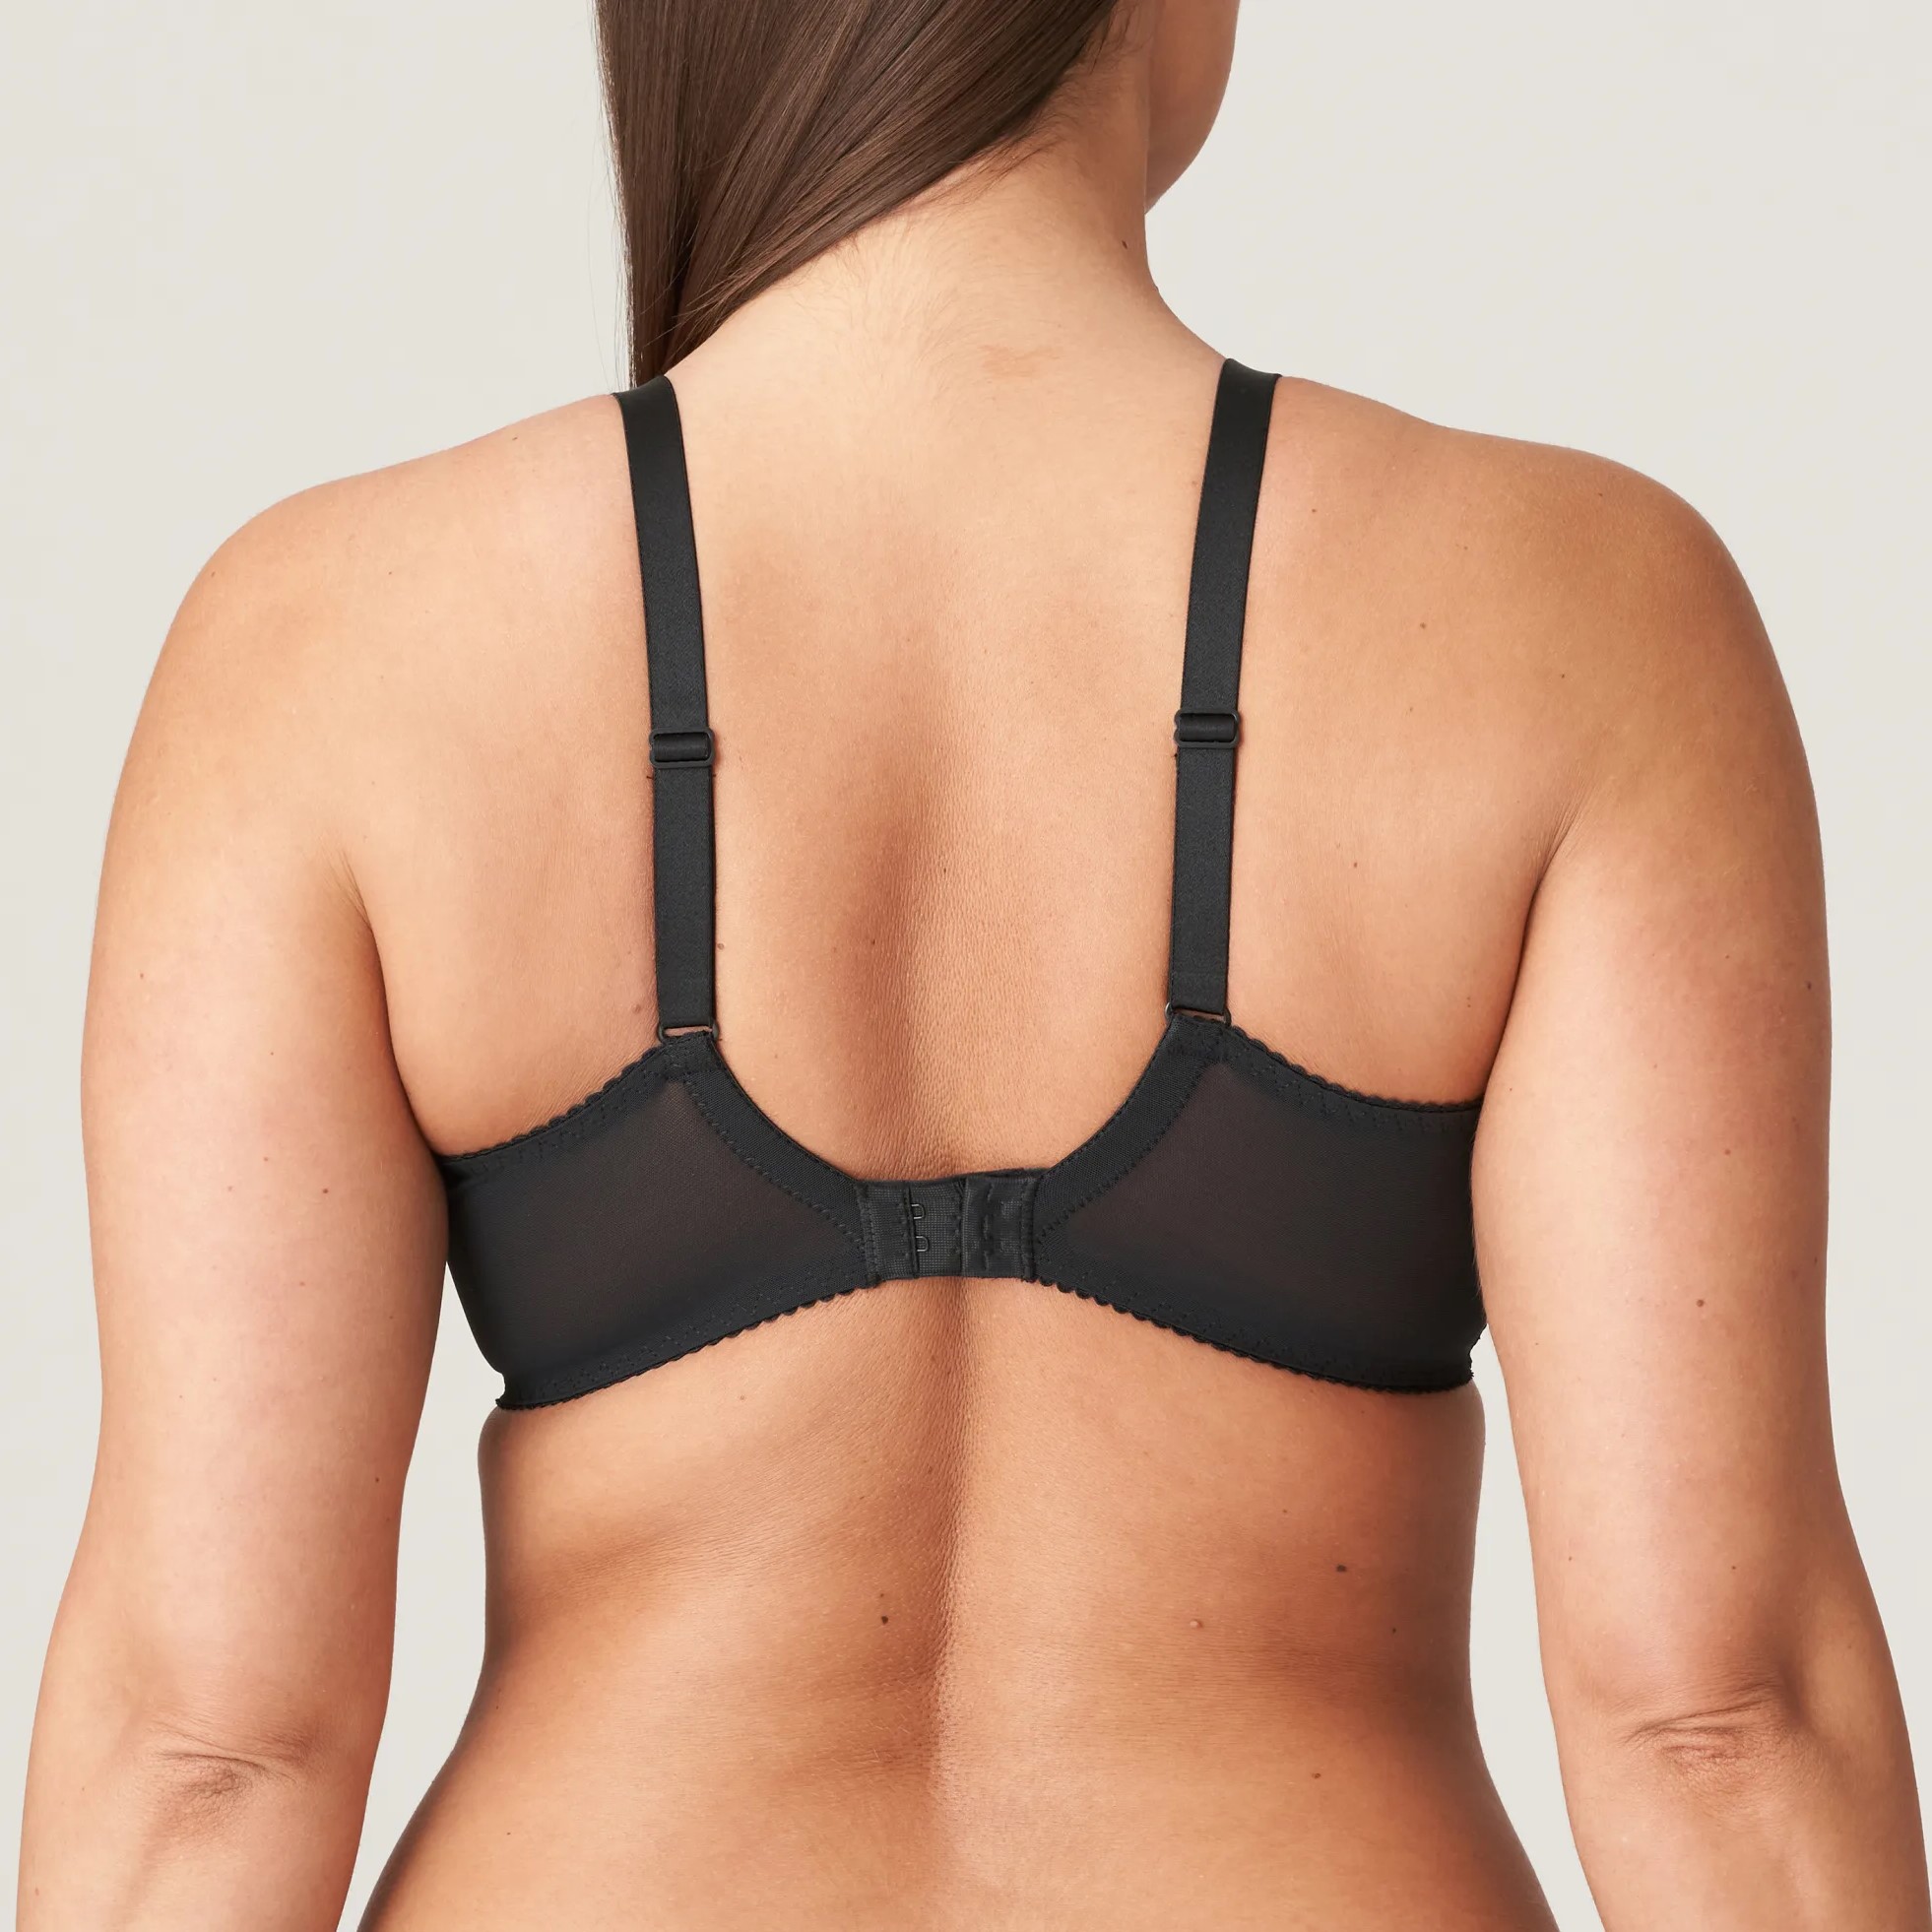 Authentic Bra B Cup, 58% OFF